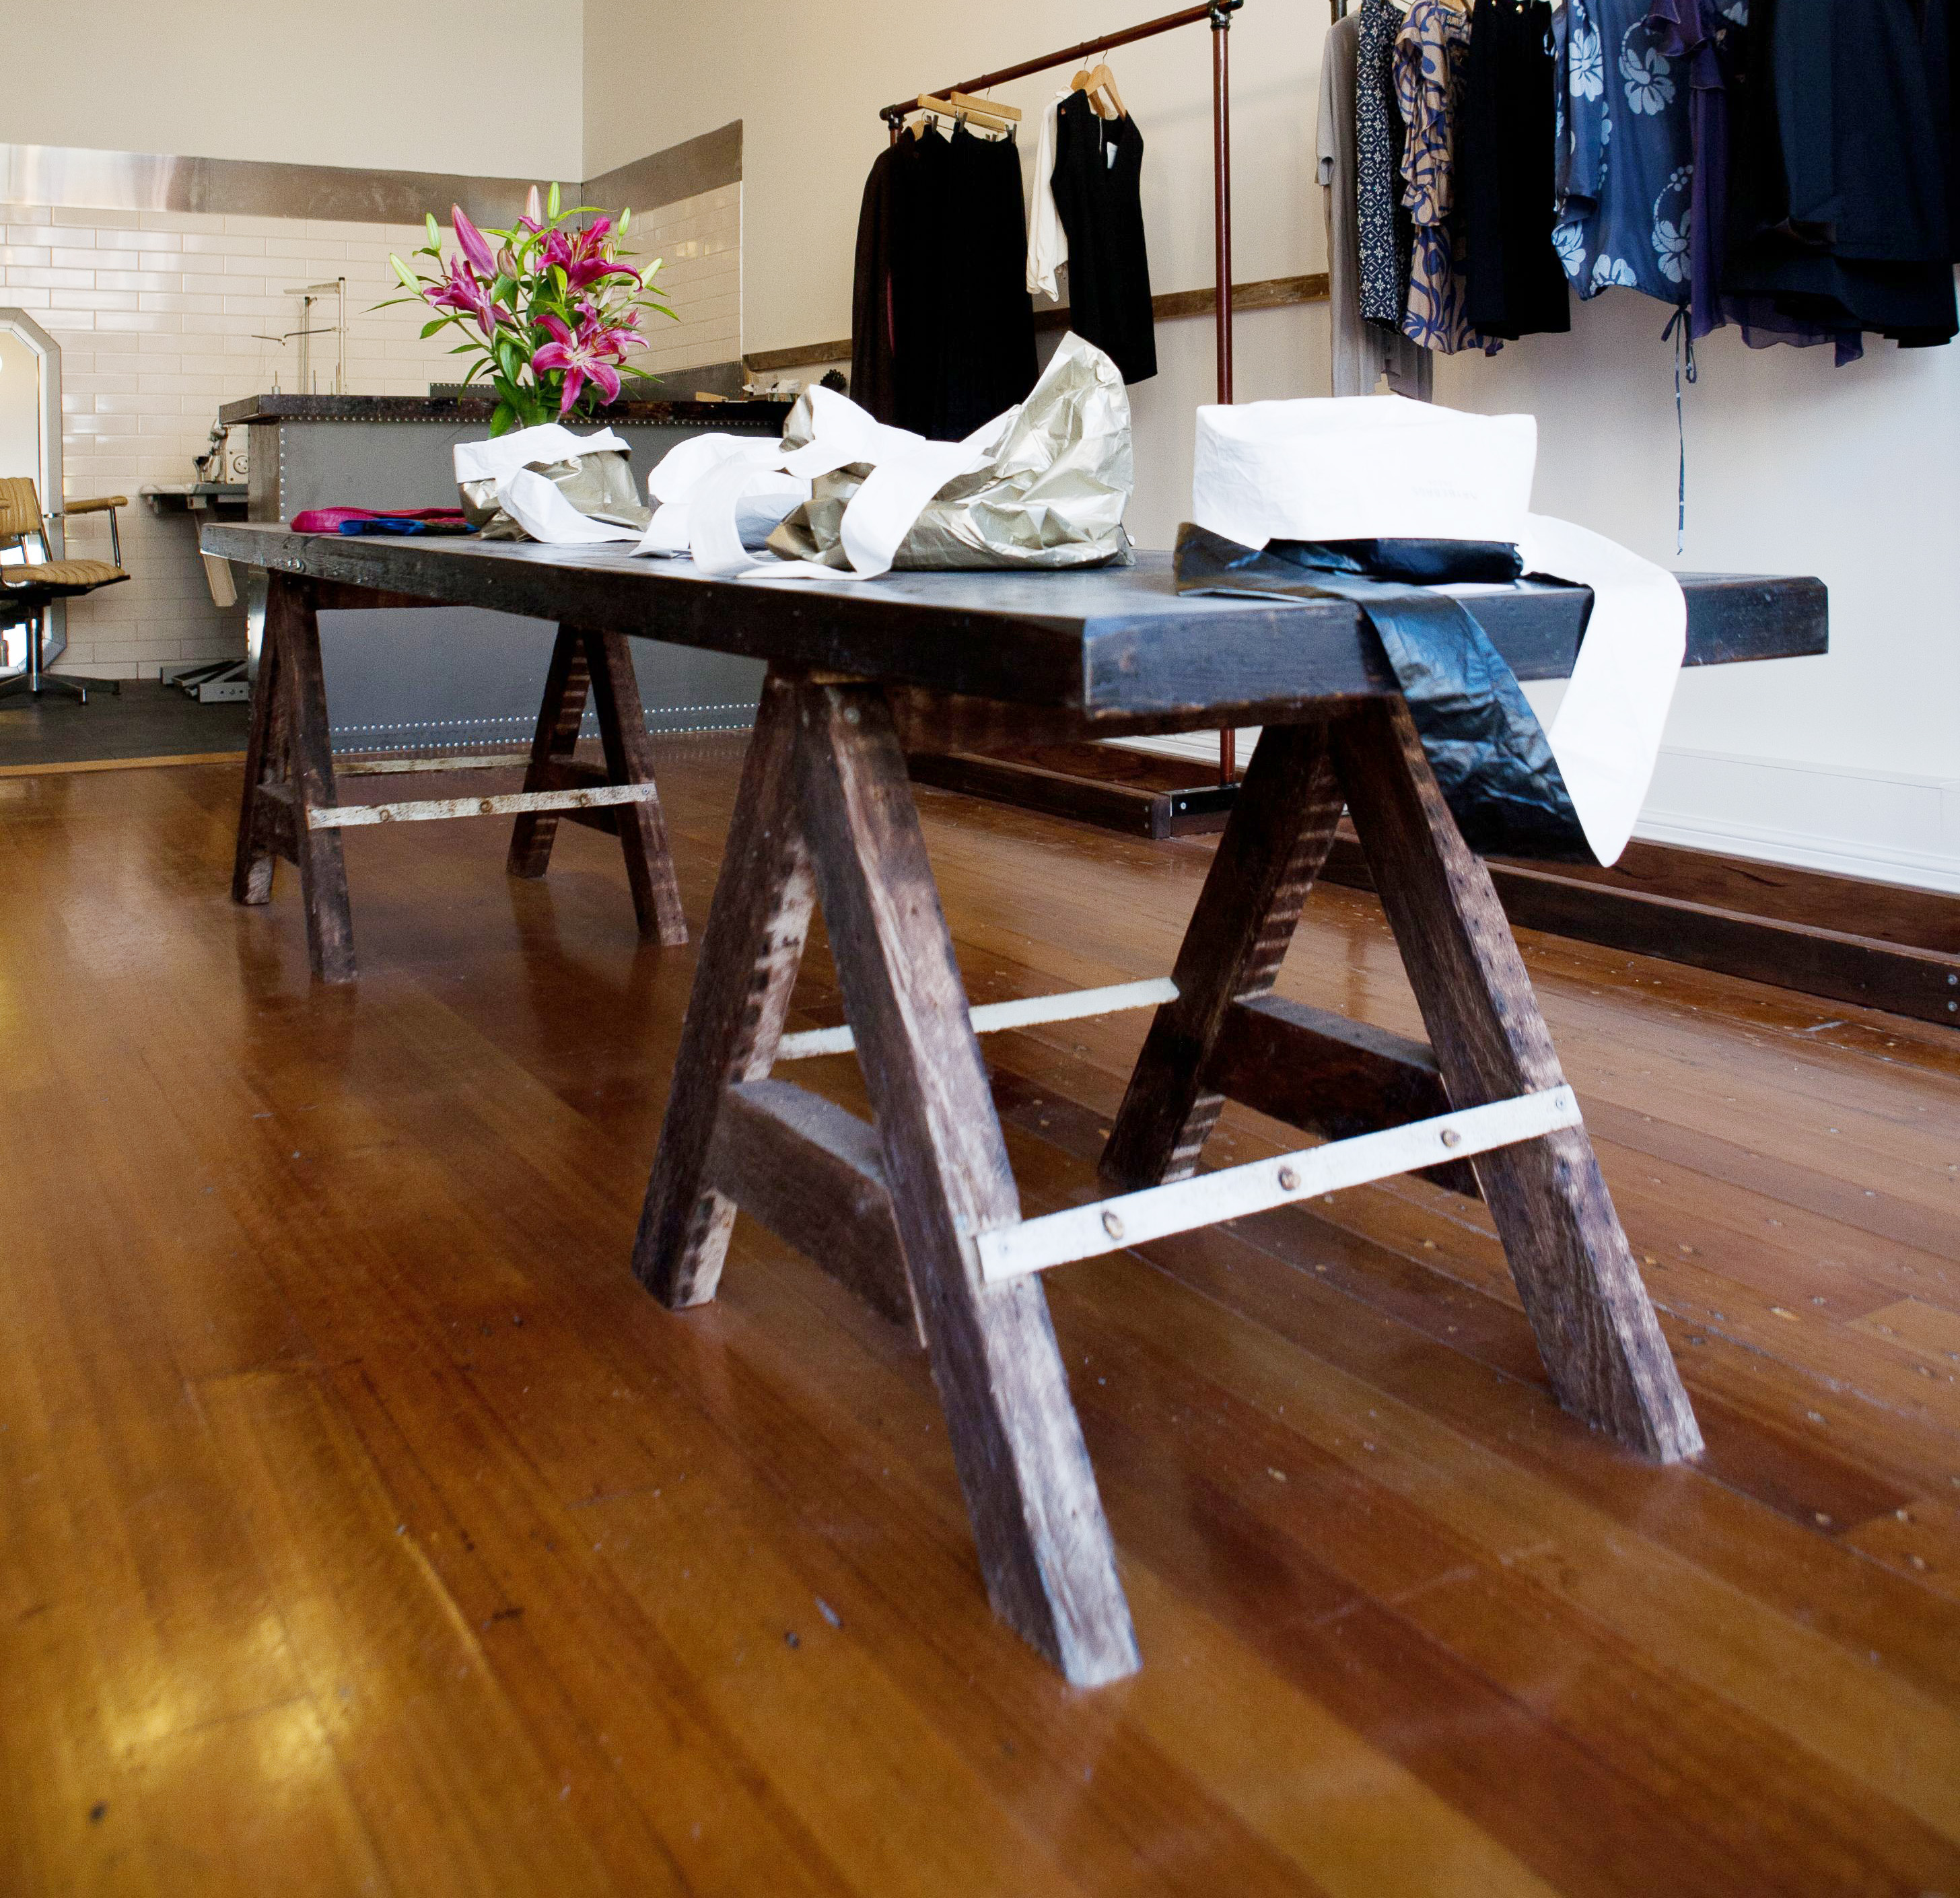 Custom shop fitout for Robe, Smith Street Collingwood, by Sime Nugent Furniture